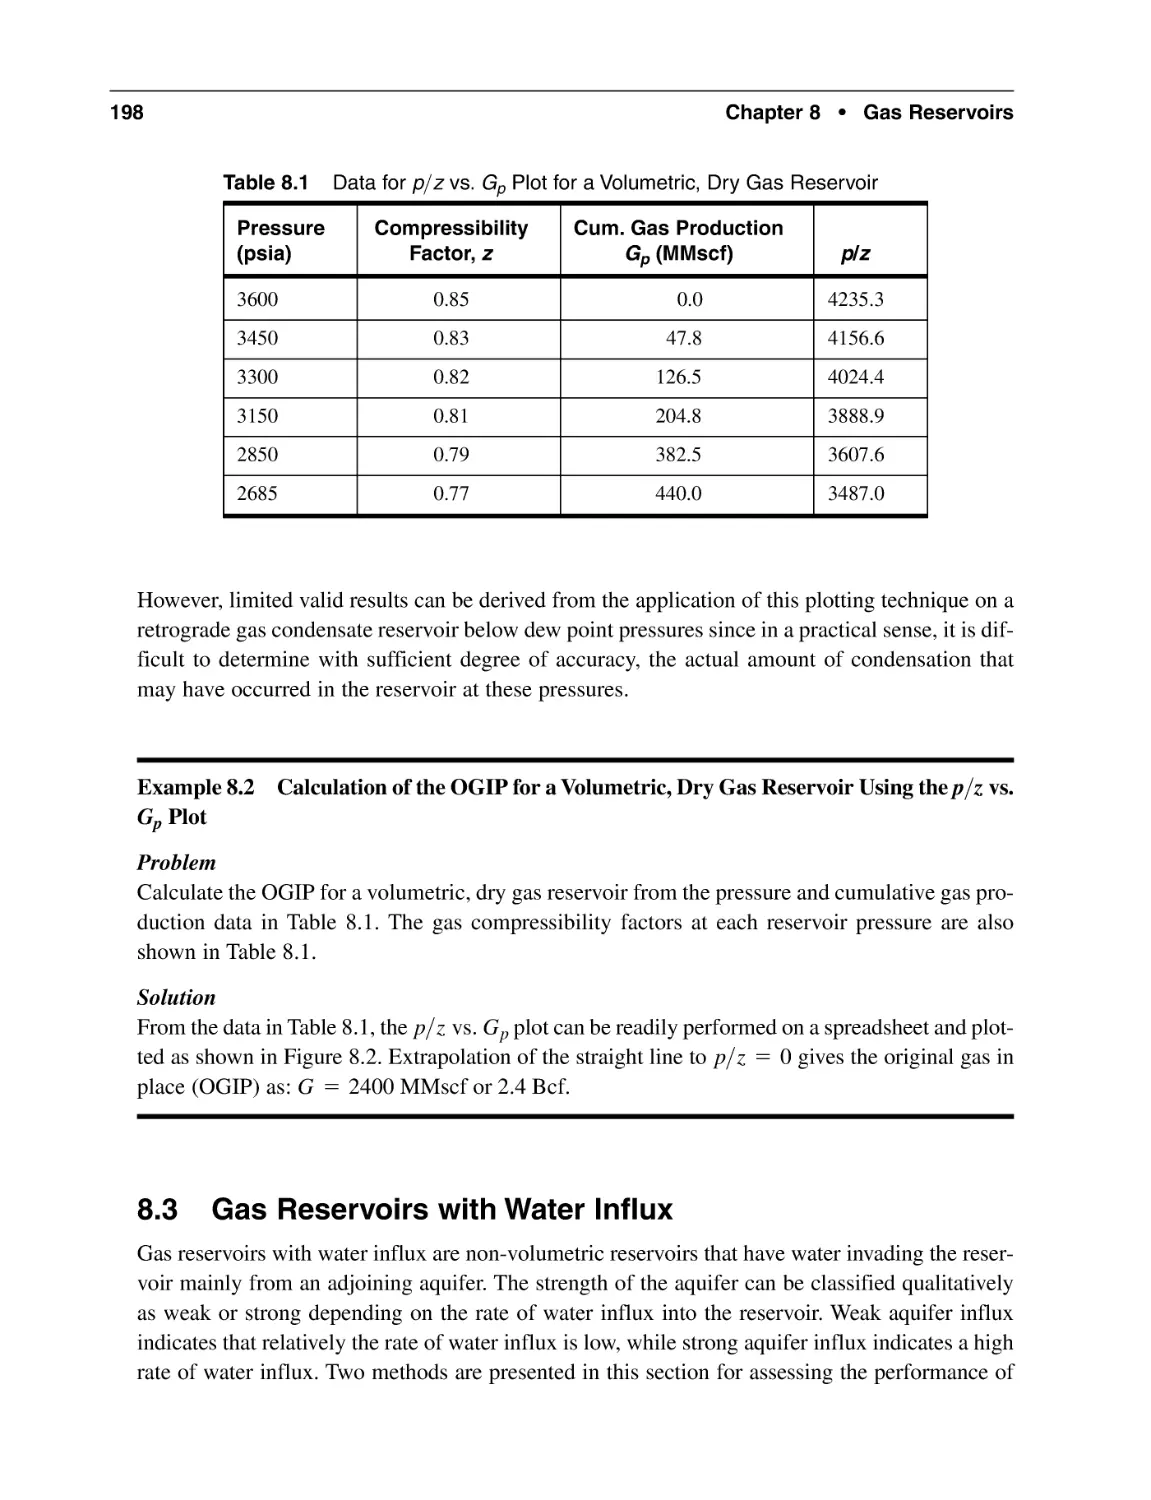 8.3 Gas Reservoirs with Water Influx